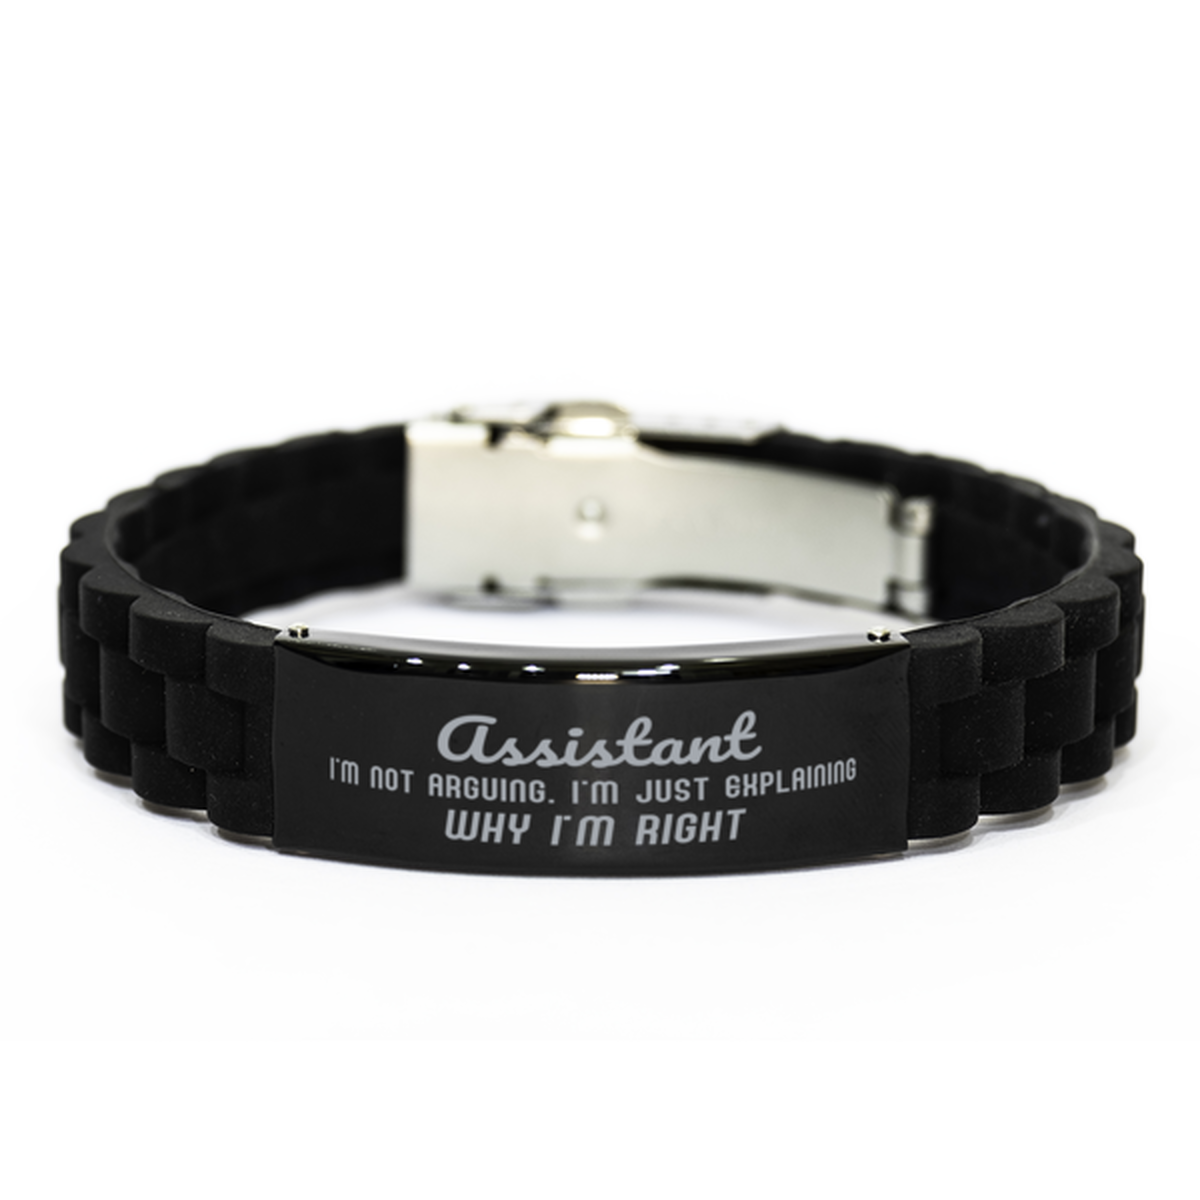 Assistant I'm not Arguing. I'm Just Explaining Why I'm RIGHT Black Glidelock Clasp Bracelet, Funny Saying Quote Assistant Gifts For Assistant Graduation Birthday Christmas Gifts for Men Women Coworker